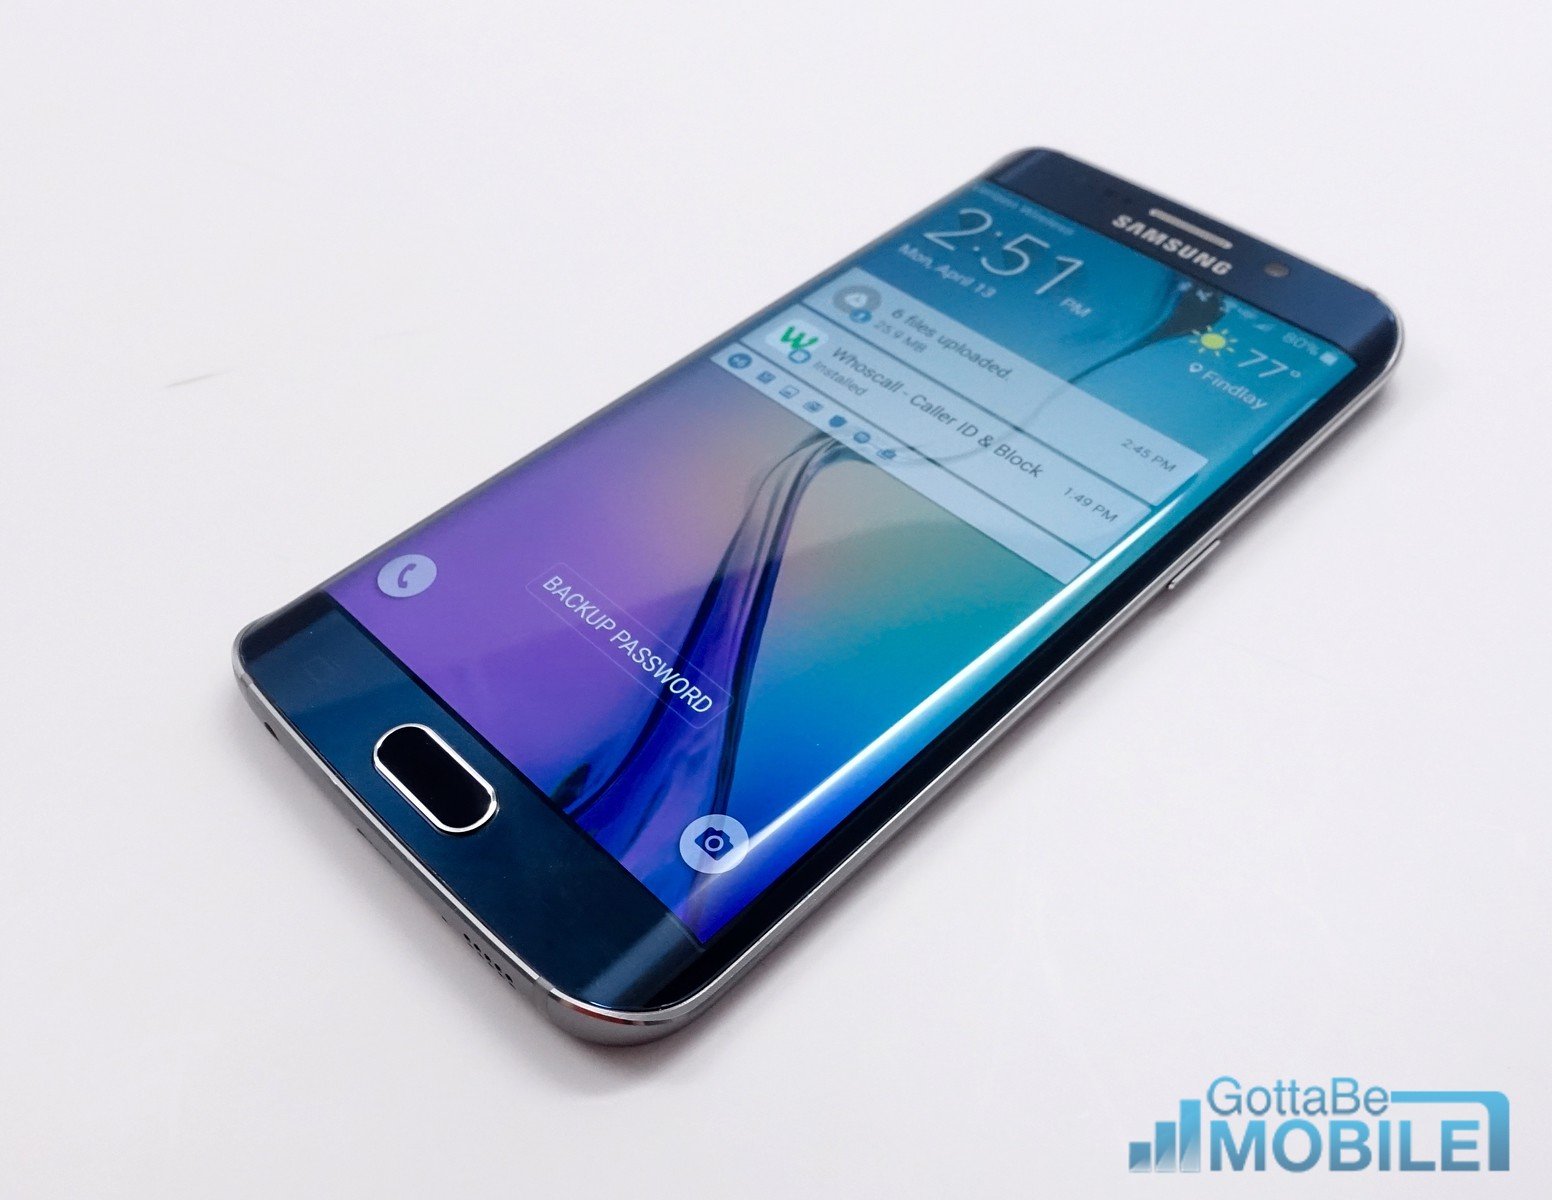 here's what i learned in 24 hours with the Verizon Galaxy S6 Edge.